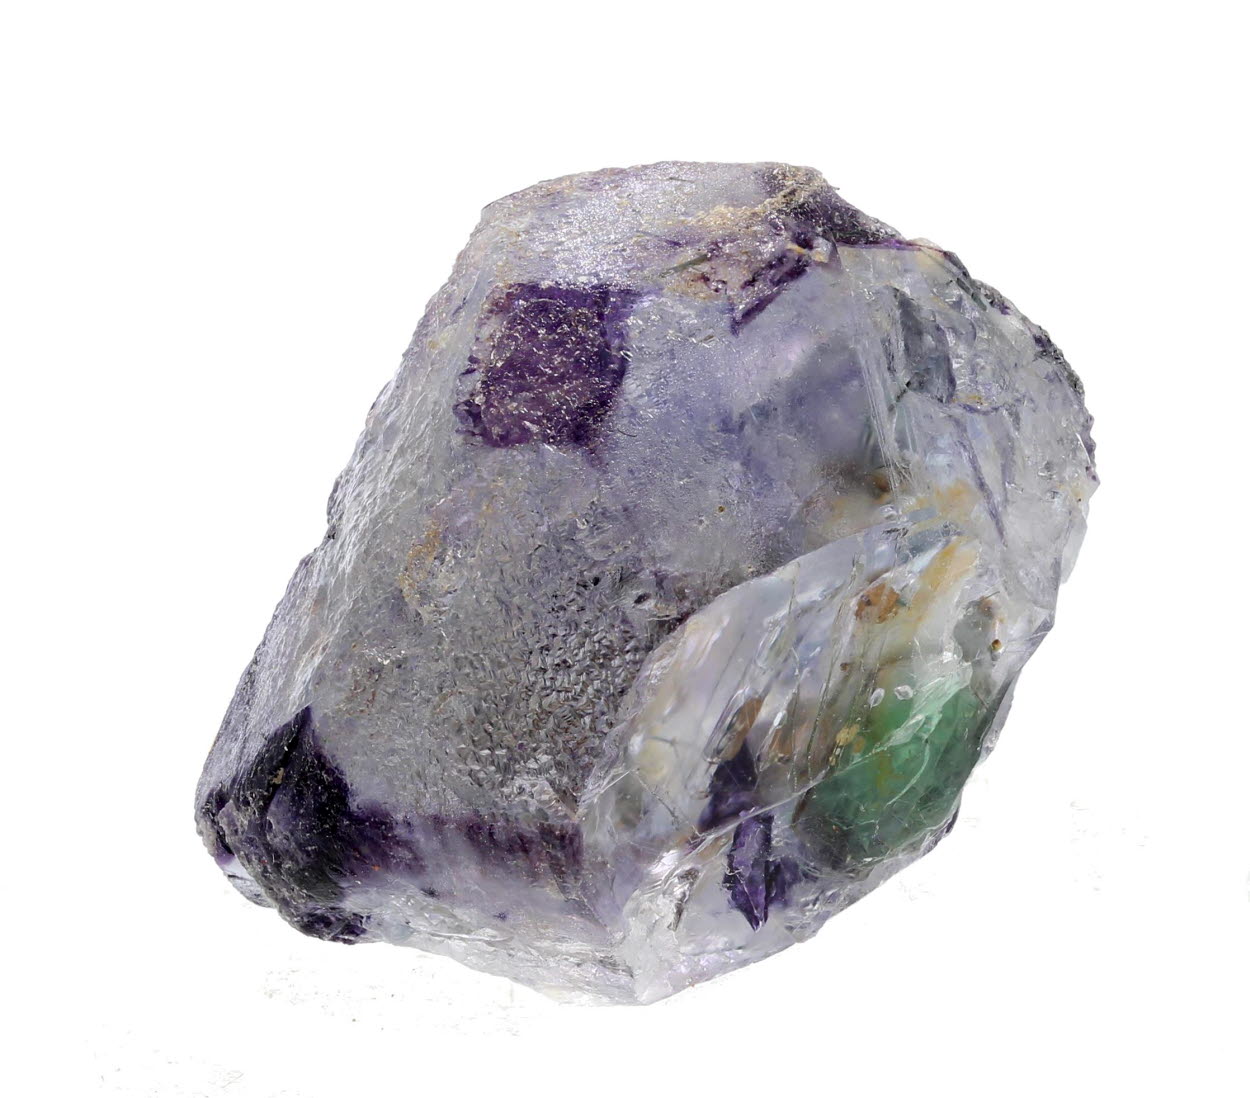 Fluorite With Schorl Inclusions